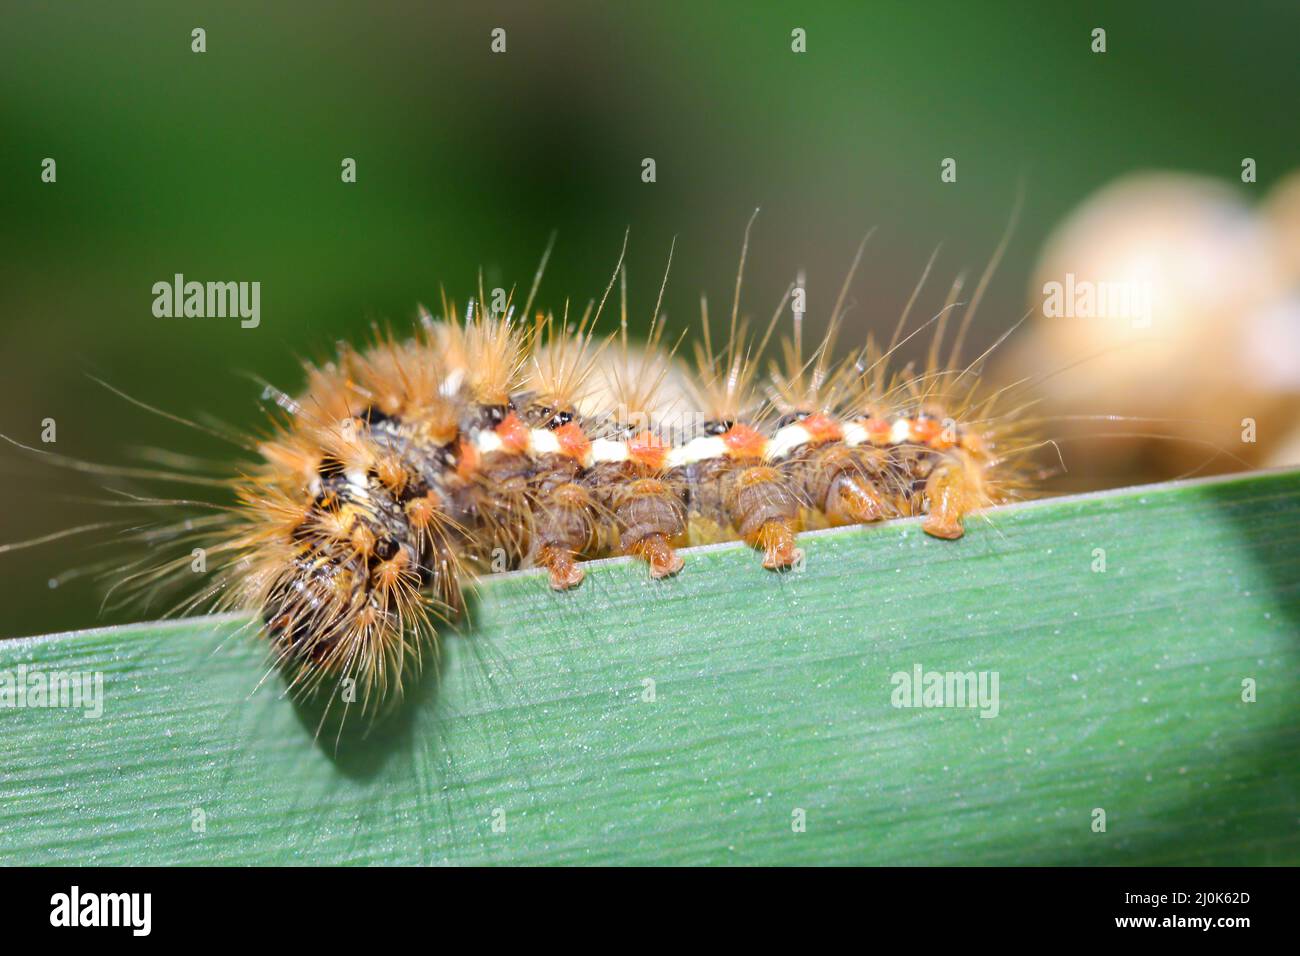 Close-up of a caterpillar of gold ater on the leaf of a water lily. Stock Photo